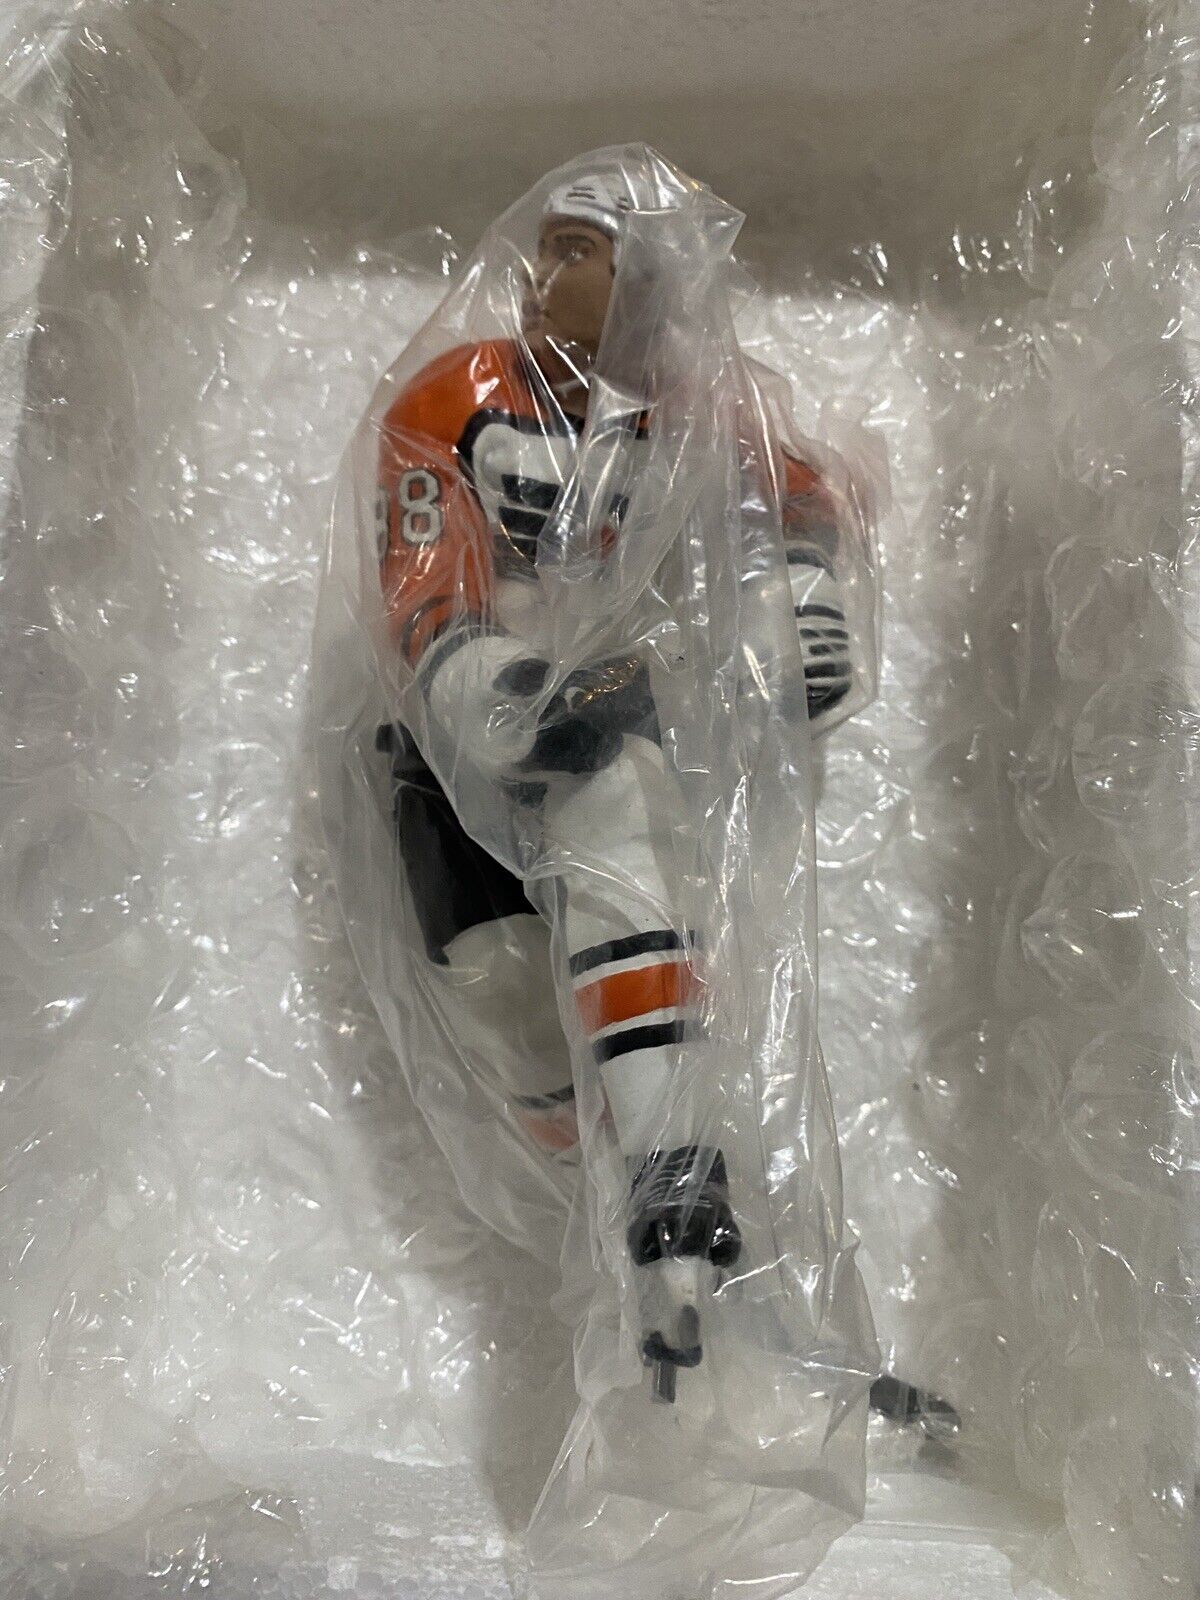 1996 SALVINO ERIC LINDROS FLYERS LIMITED EDITION SIGNED FIGURE #201 / 888.